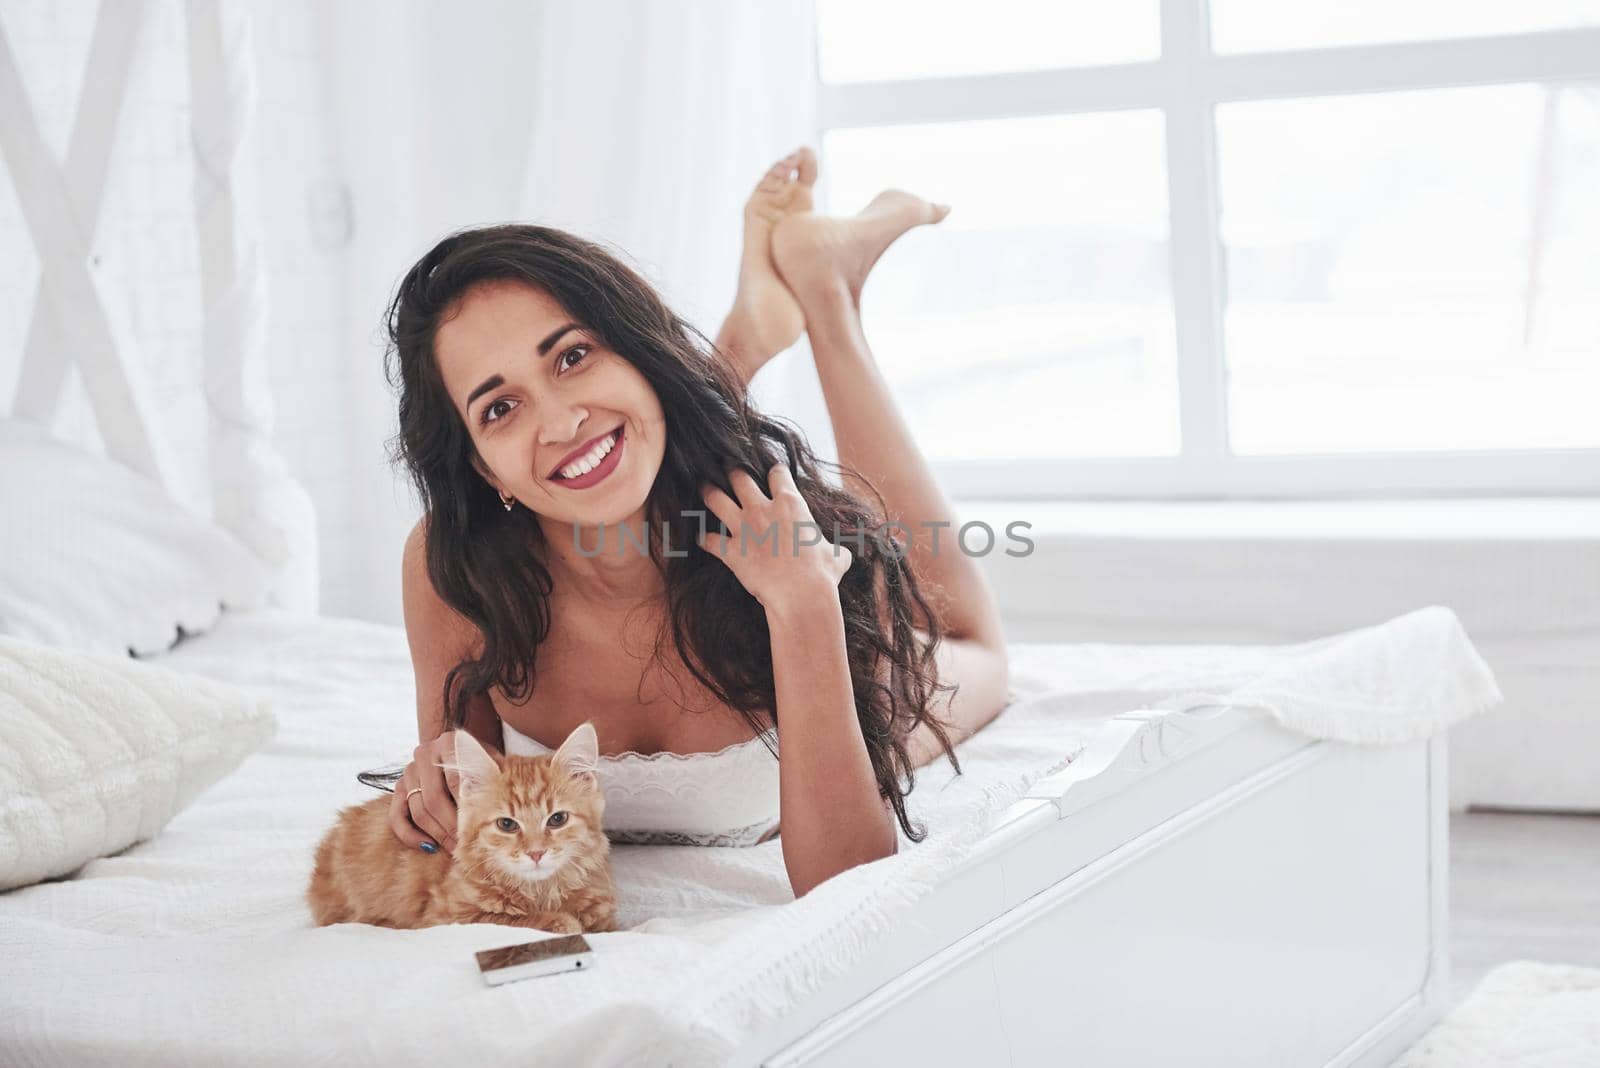 Such a sincere smile. Attractive blonde resting on the white bed with her cute kitten by Standret